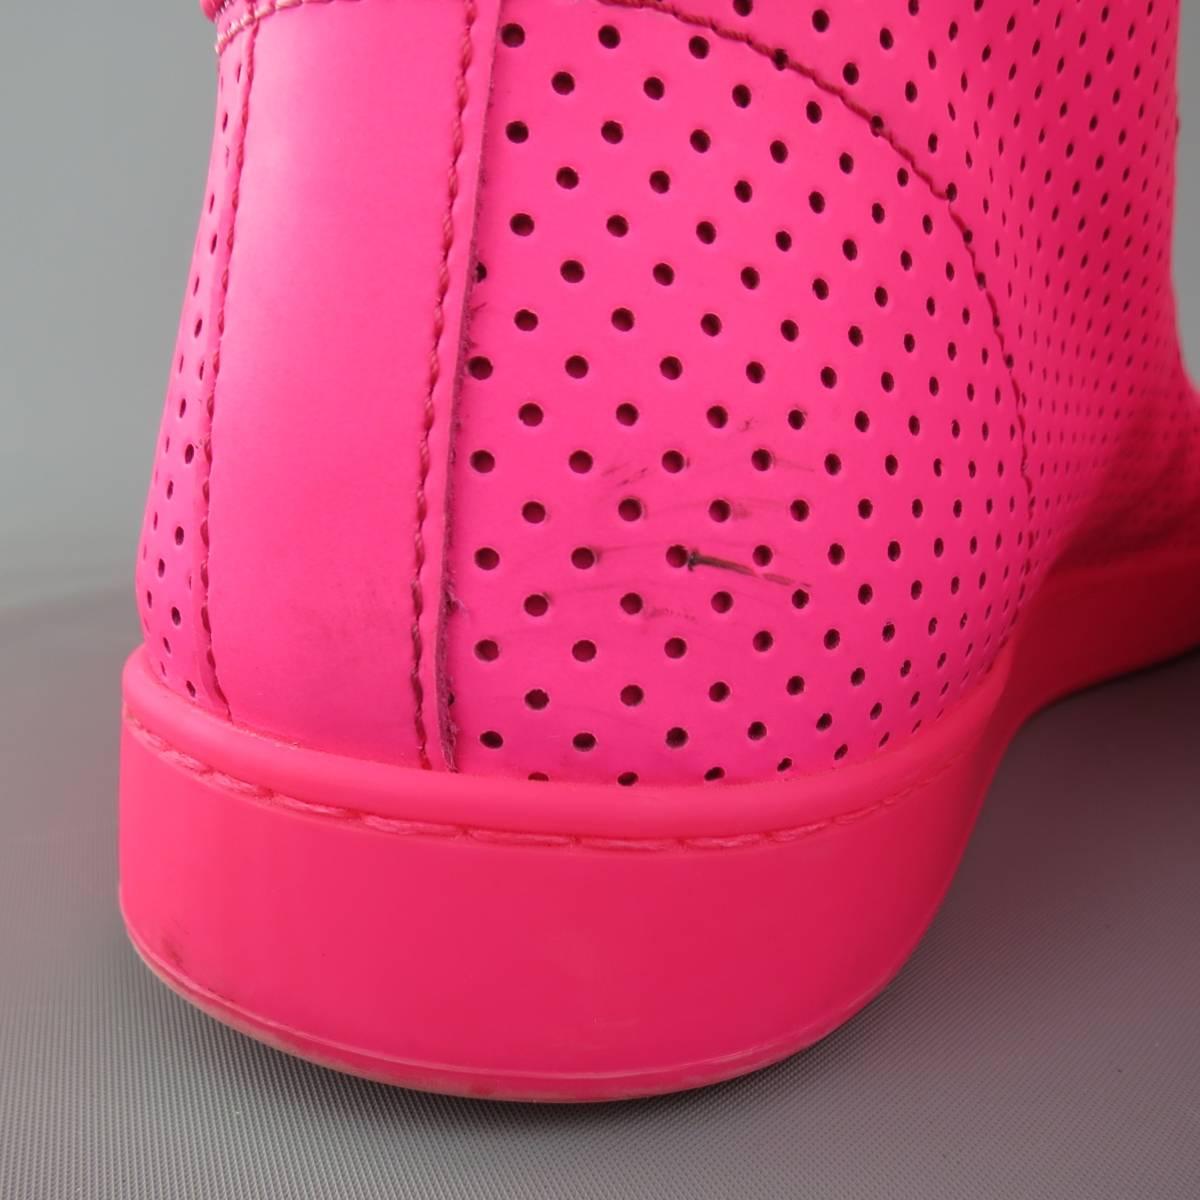 Men's GUCCI Size 11 Neon Pink Perforated Leather High Top CODA Sneakers 2